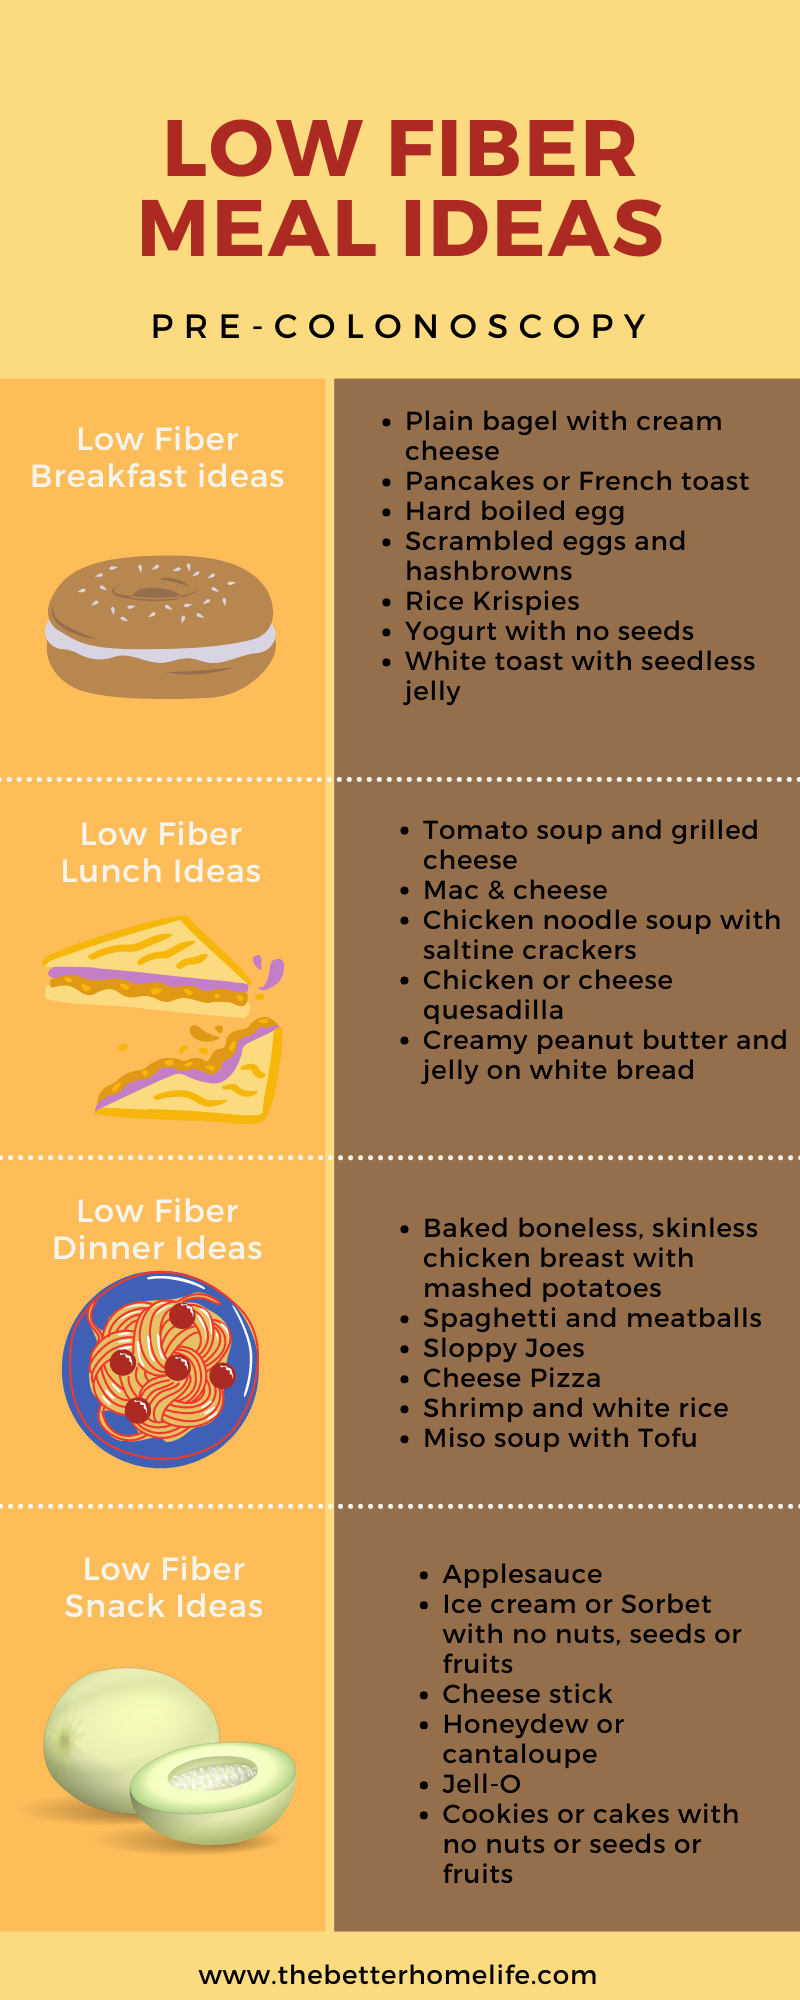 Low fiber meal ideas infographic